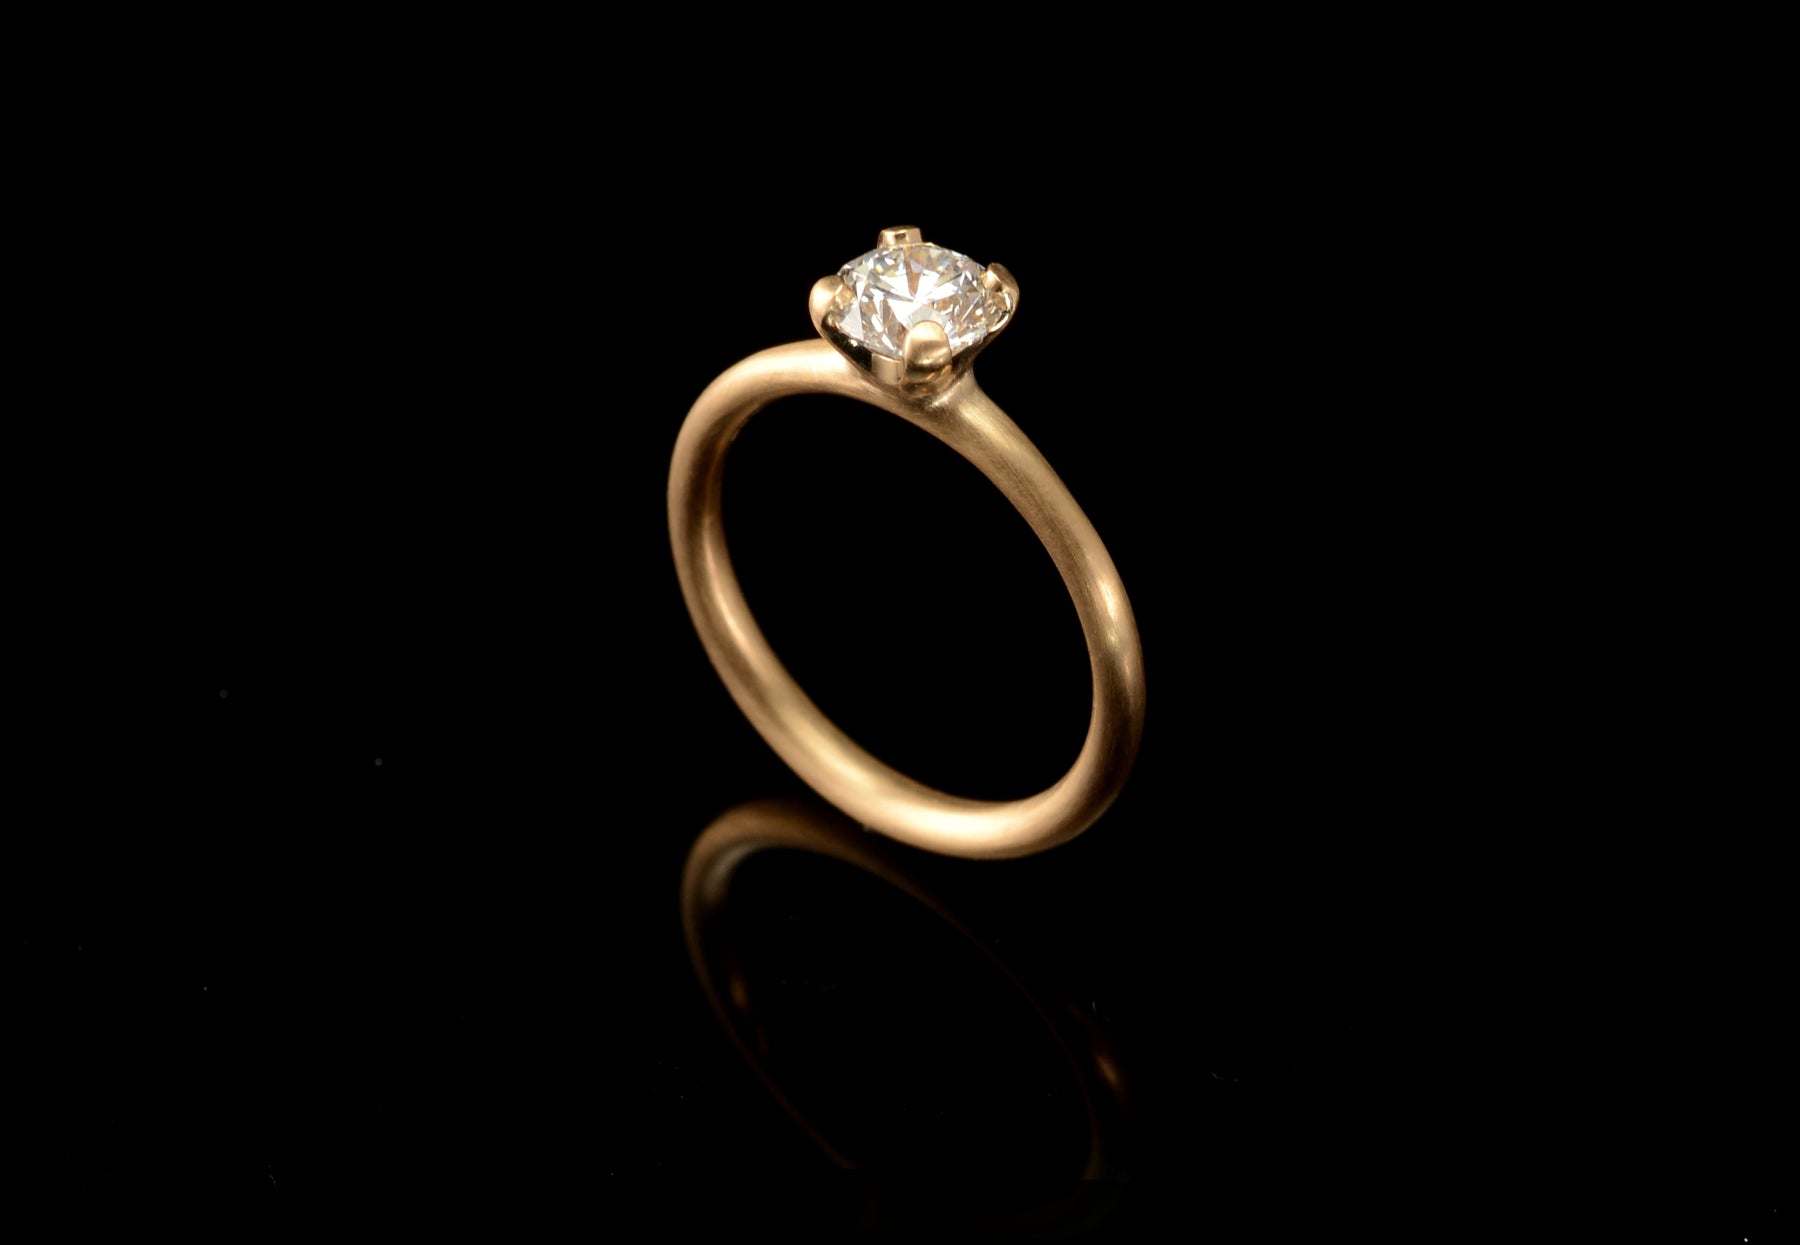 4 claw white diamond rose gold engagement ring